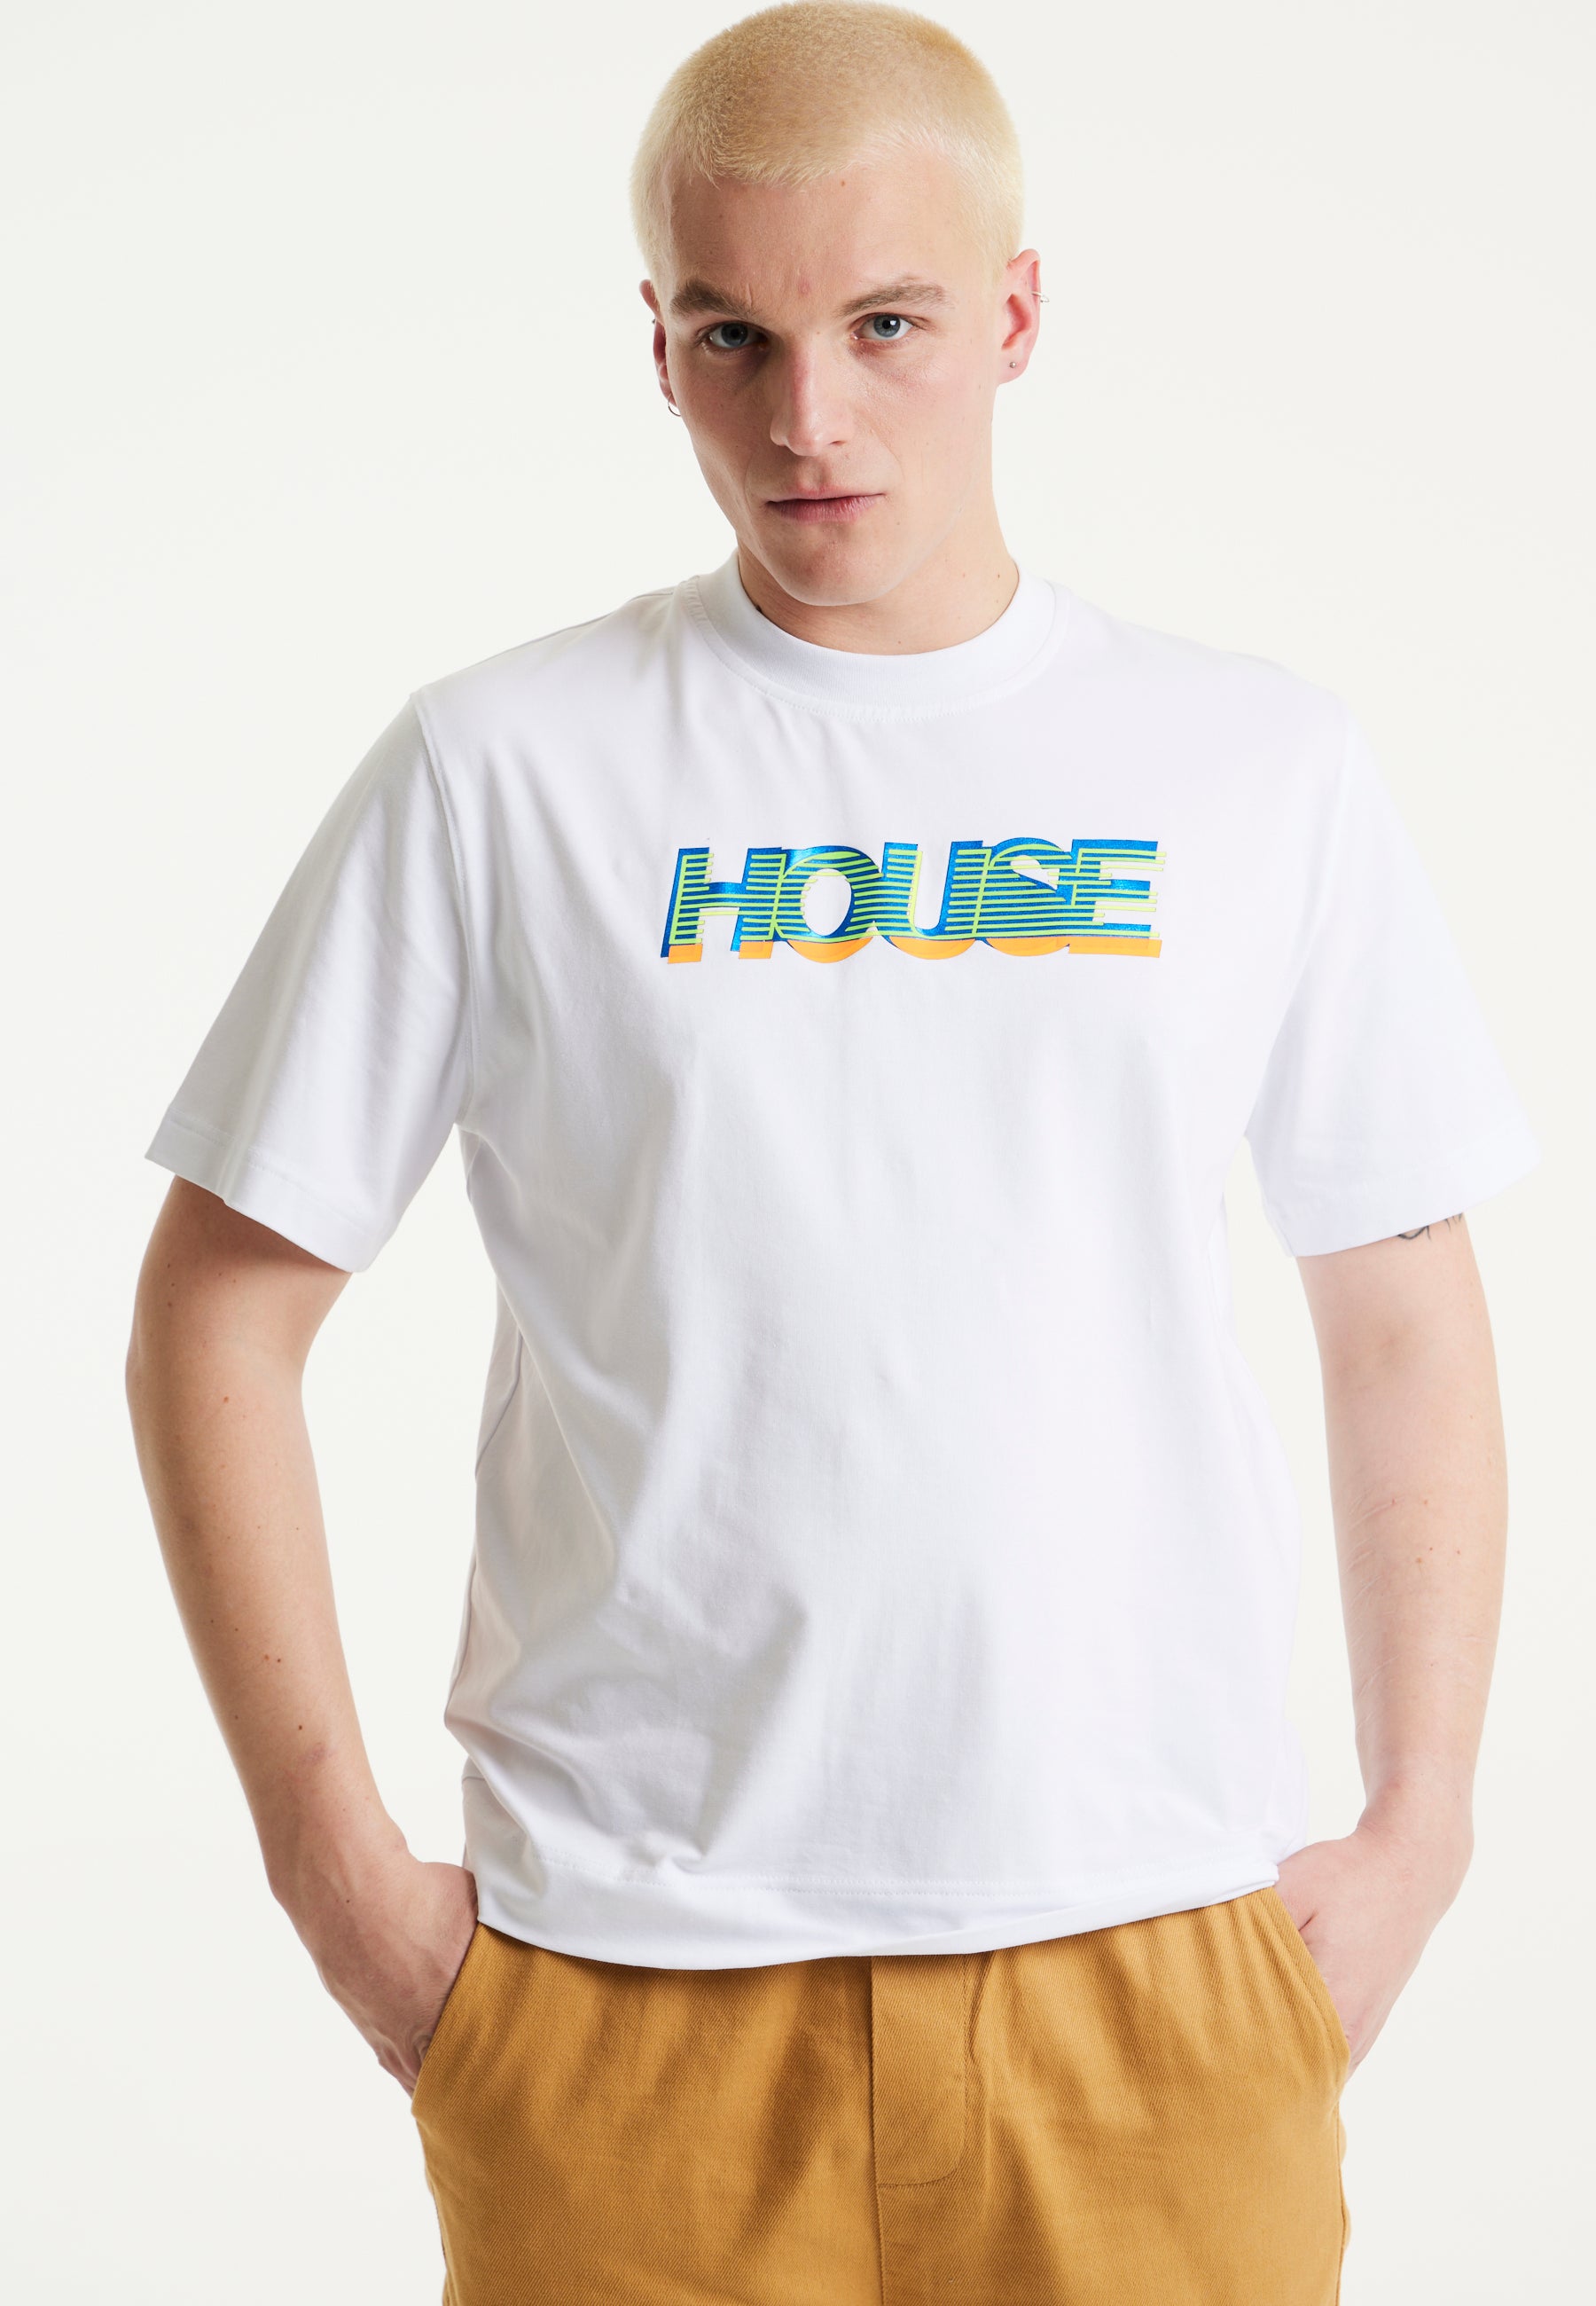 Tops | T-Shirts | Womenswear – Page 2 – House of Holland®